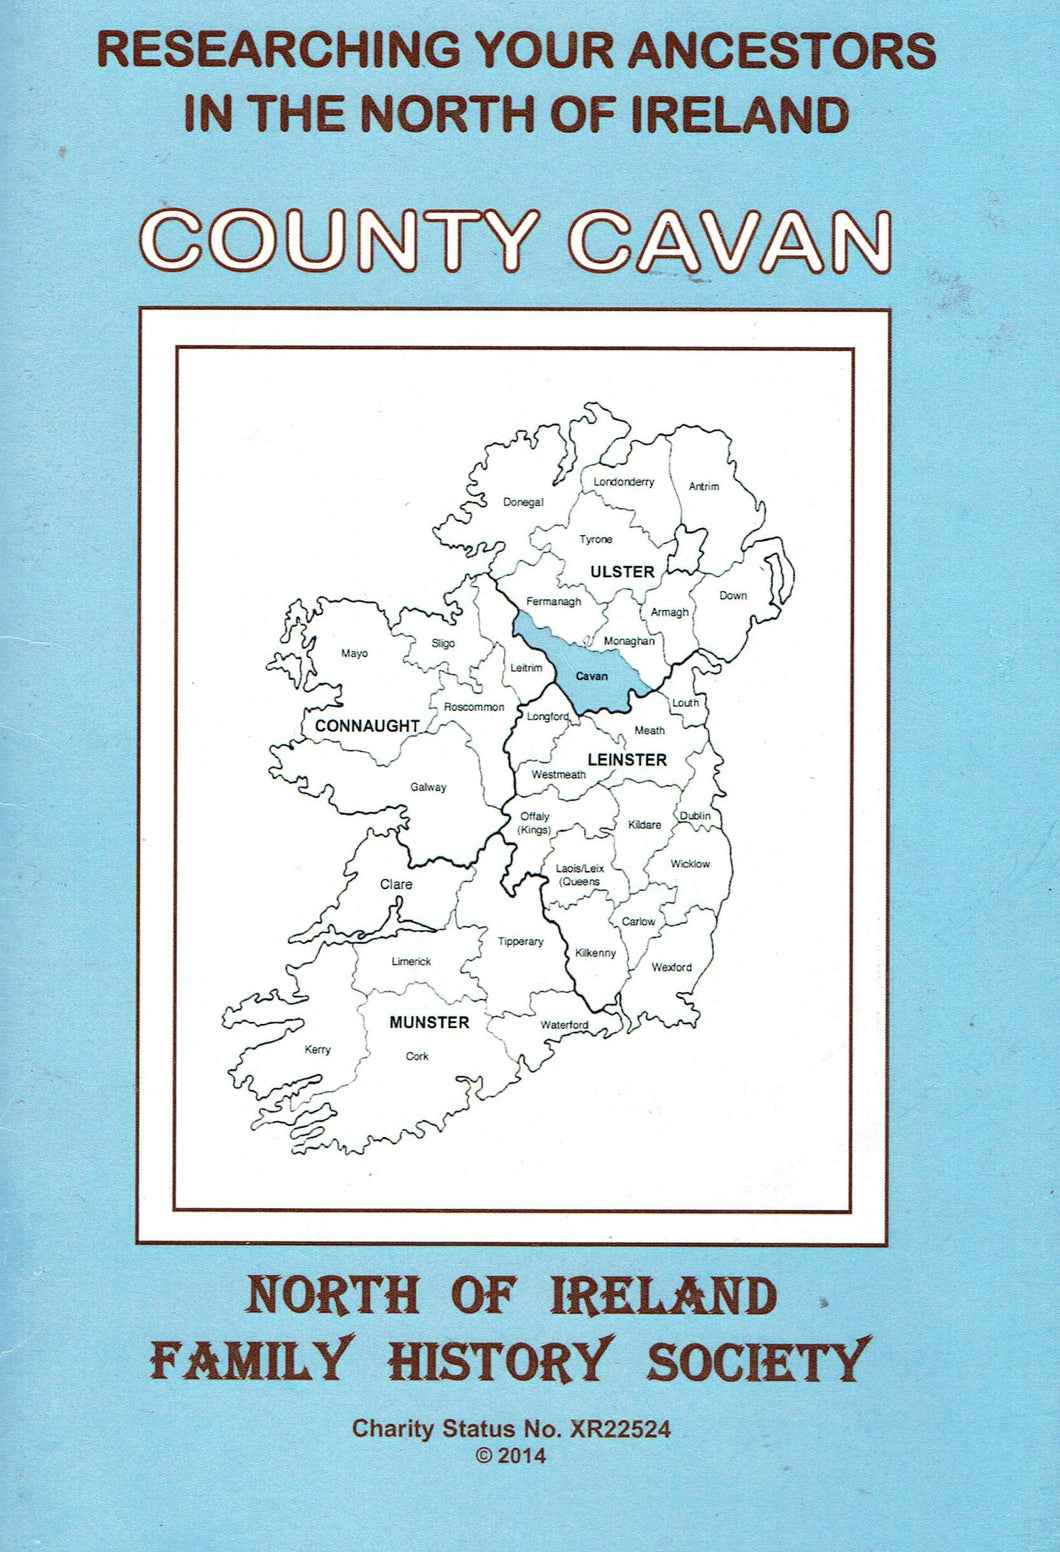 Researching Your Ancestors in the North of Ireland: County Cavan